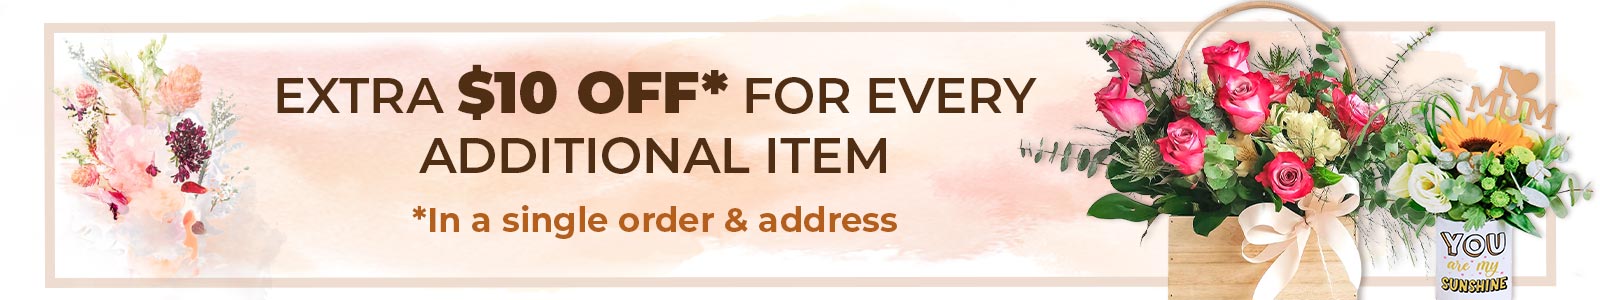 Extra $10 off for every additional item